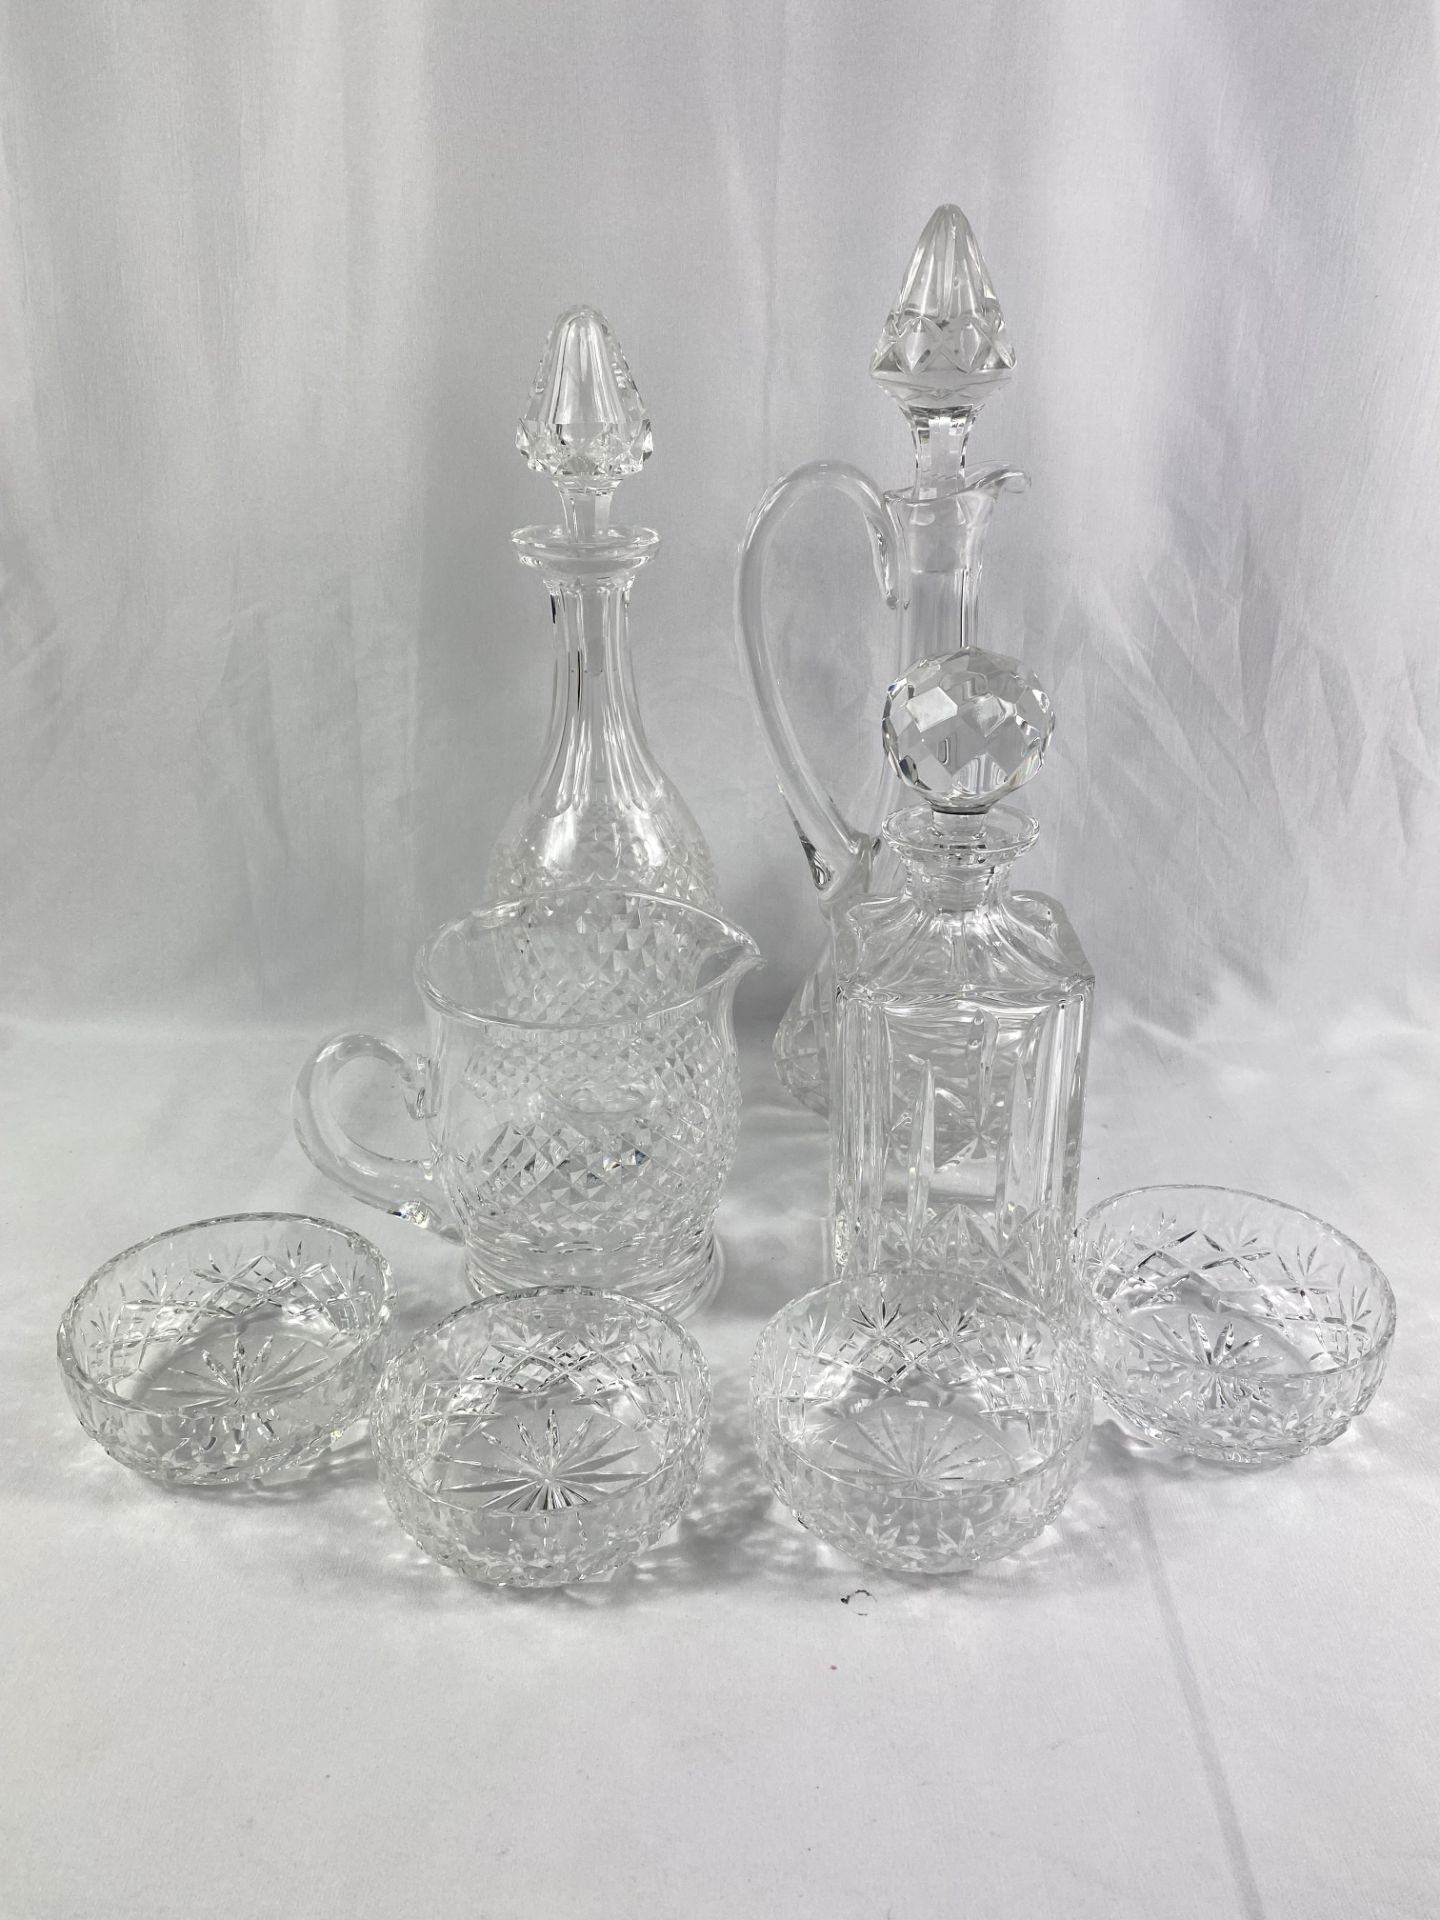 Three crystal glass decanters and other glassware